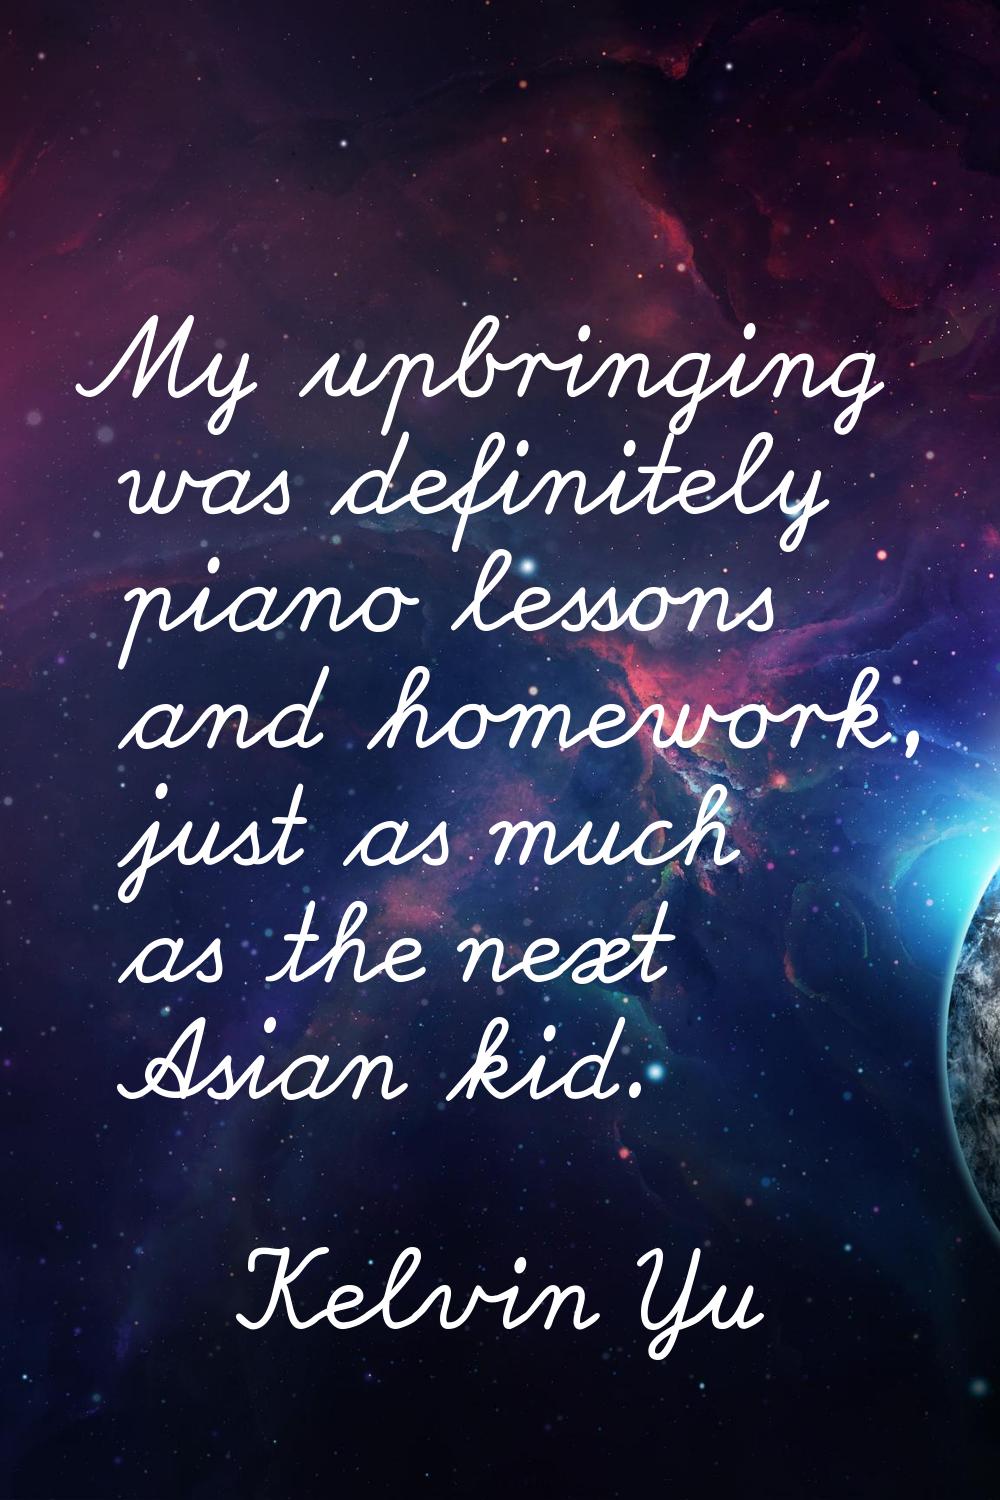 My upbringing was definitely piano lessons and homework, just as much as the next Asian kid.